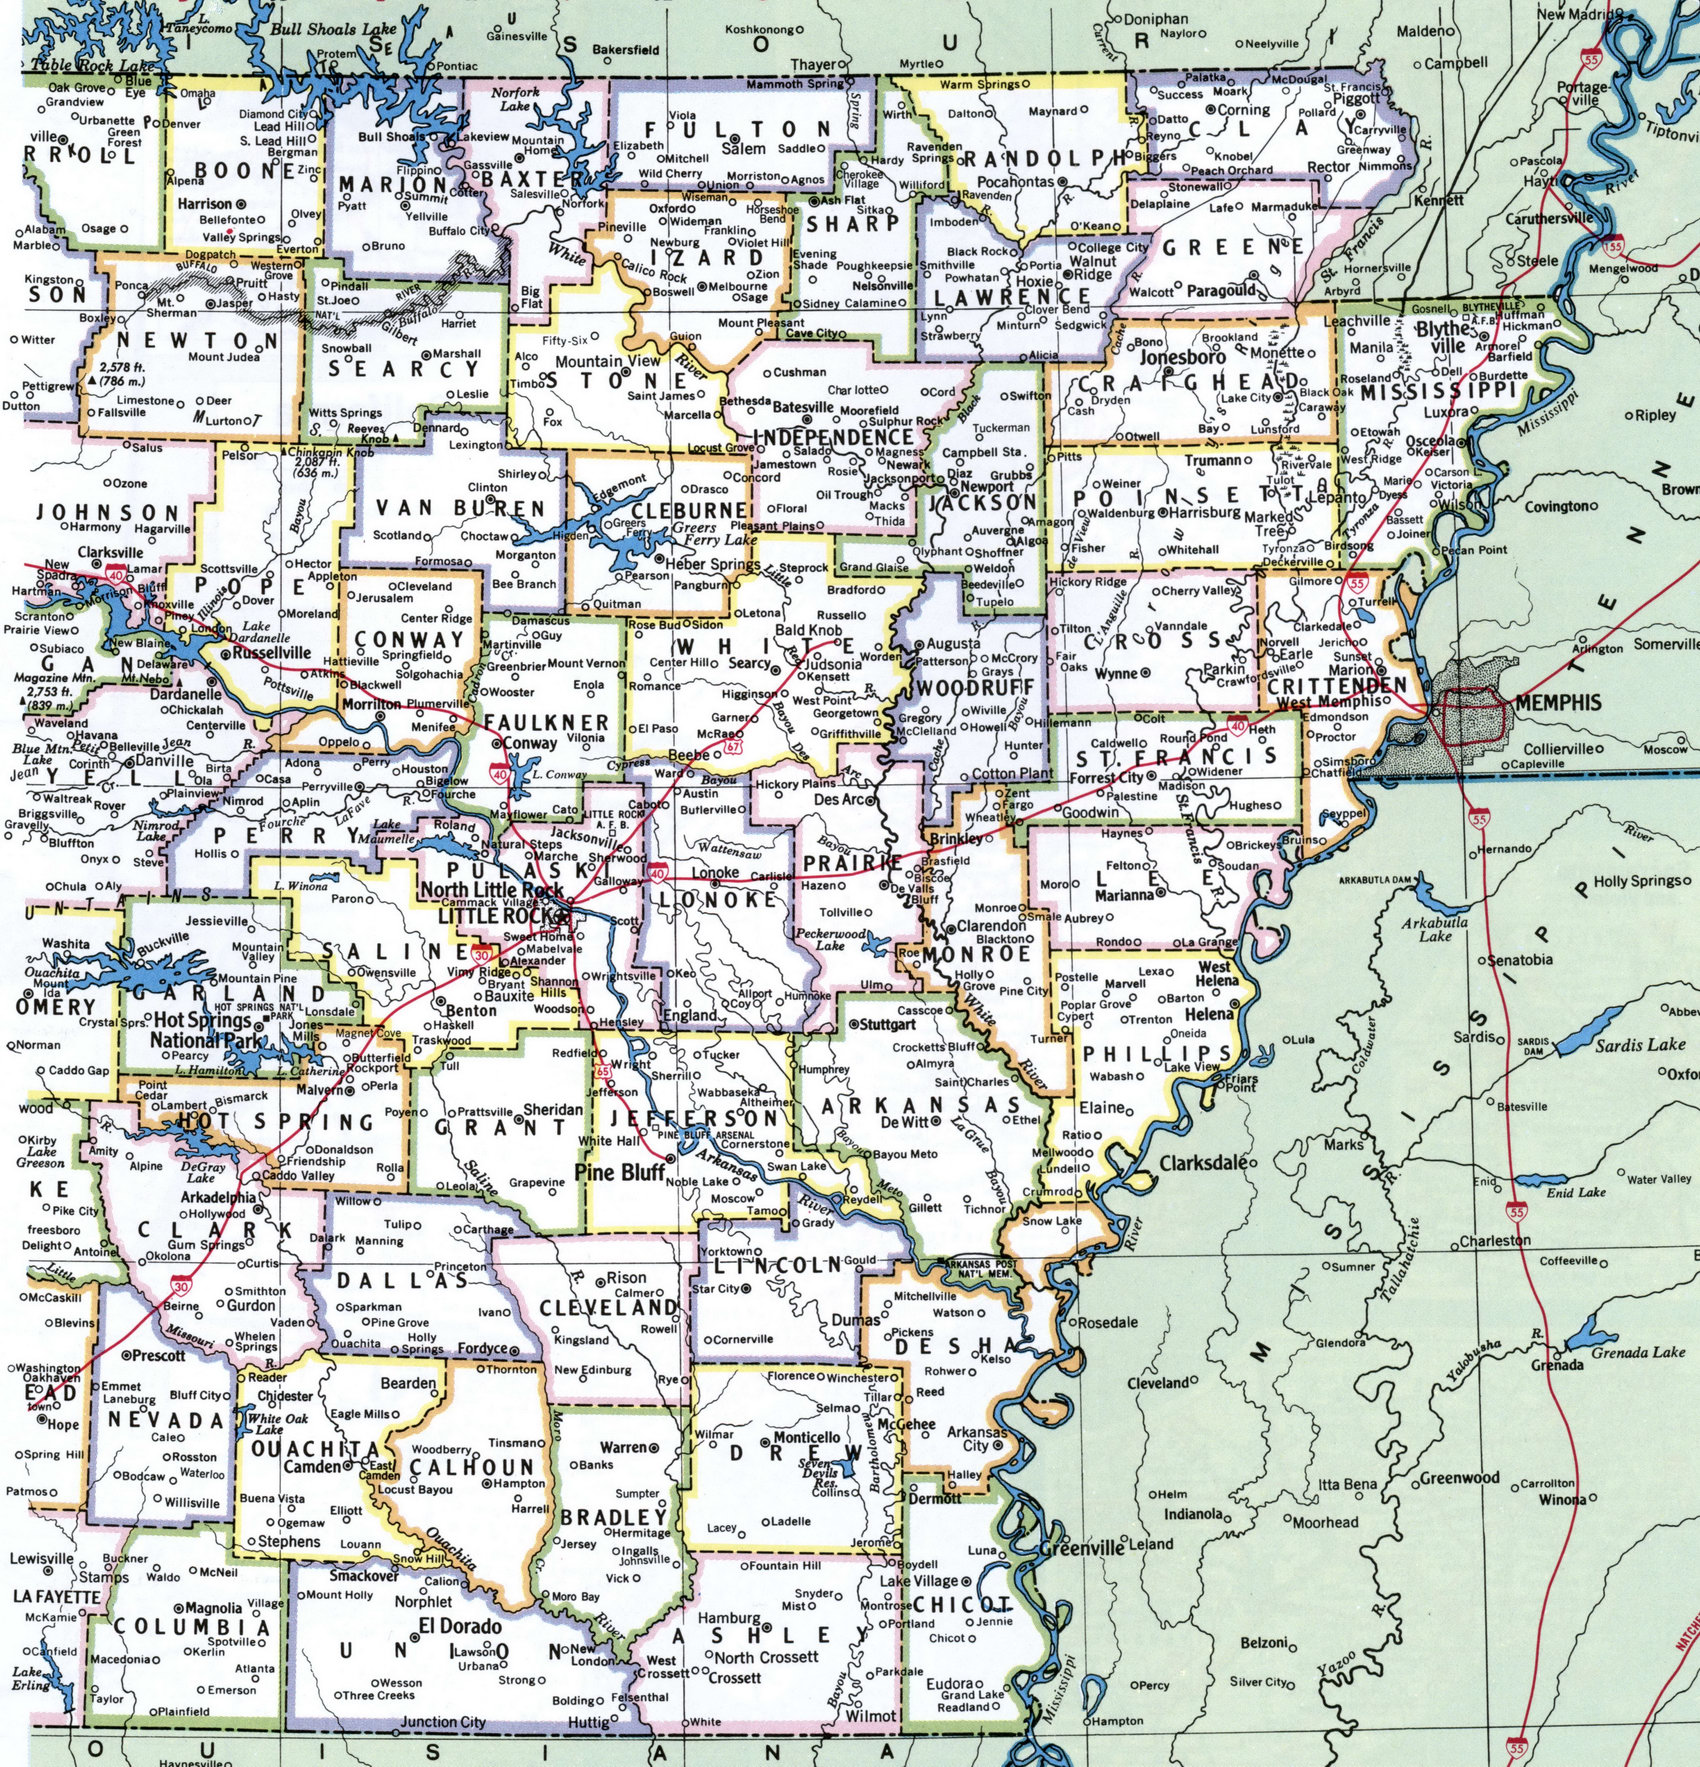 Map of Arkansas by county